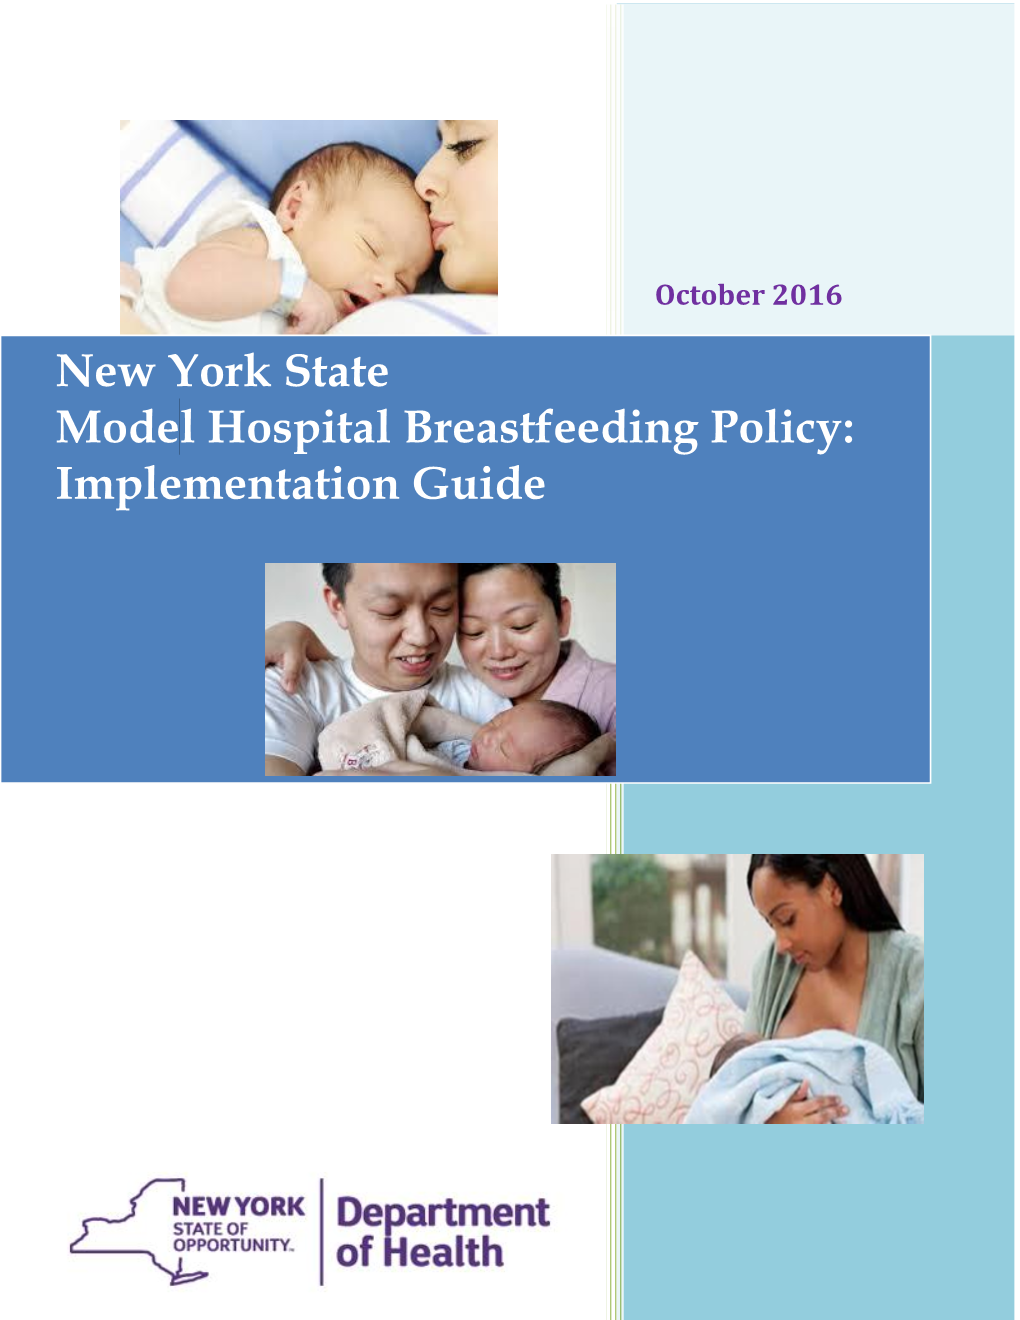 New York State Model Hospital Breastfeeding Policy: Implementation Guide